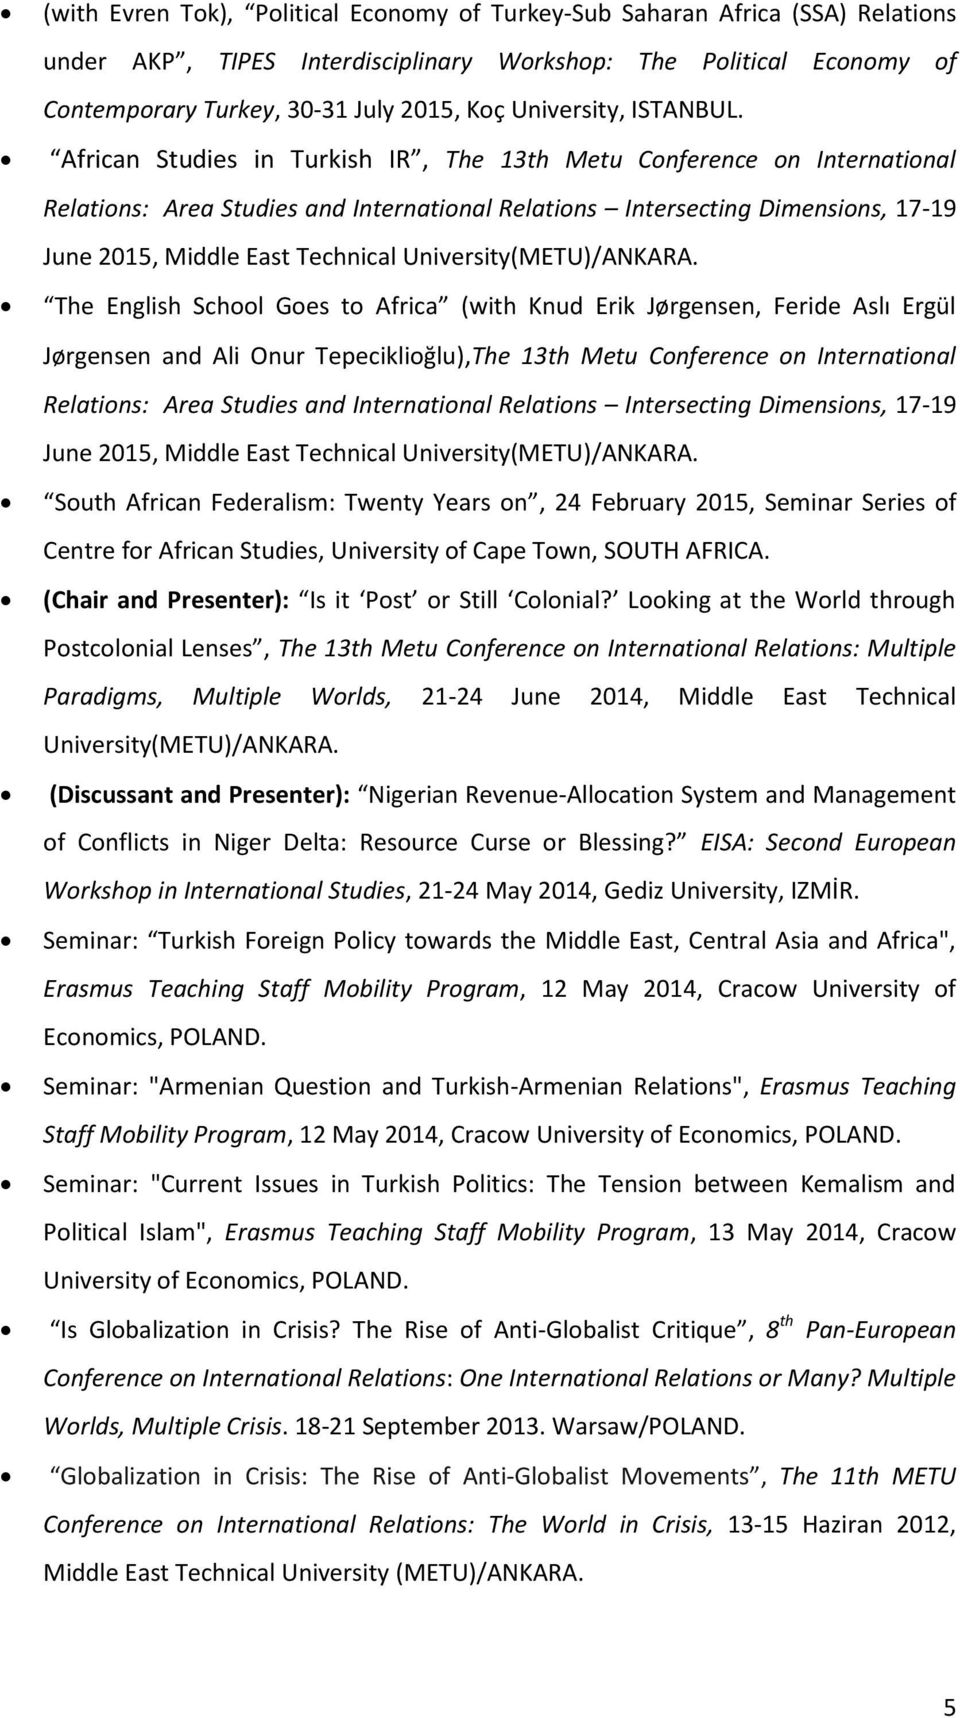 African Studies in Turkish IR, The 13th Metu Conference on International Relations: Area Studies and International Relations Intersecting Dimensions, 17-19 June 2015, Middle East Technical